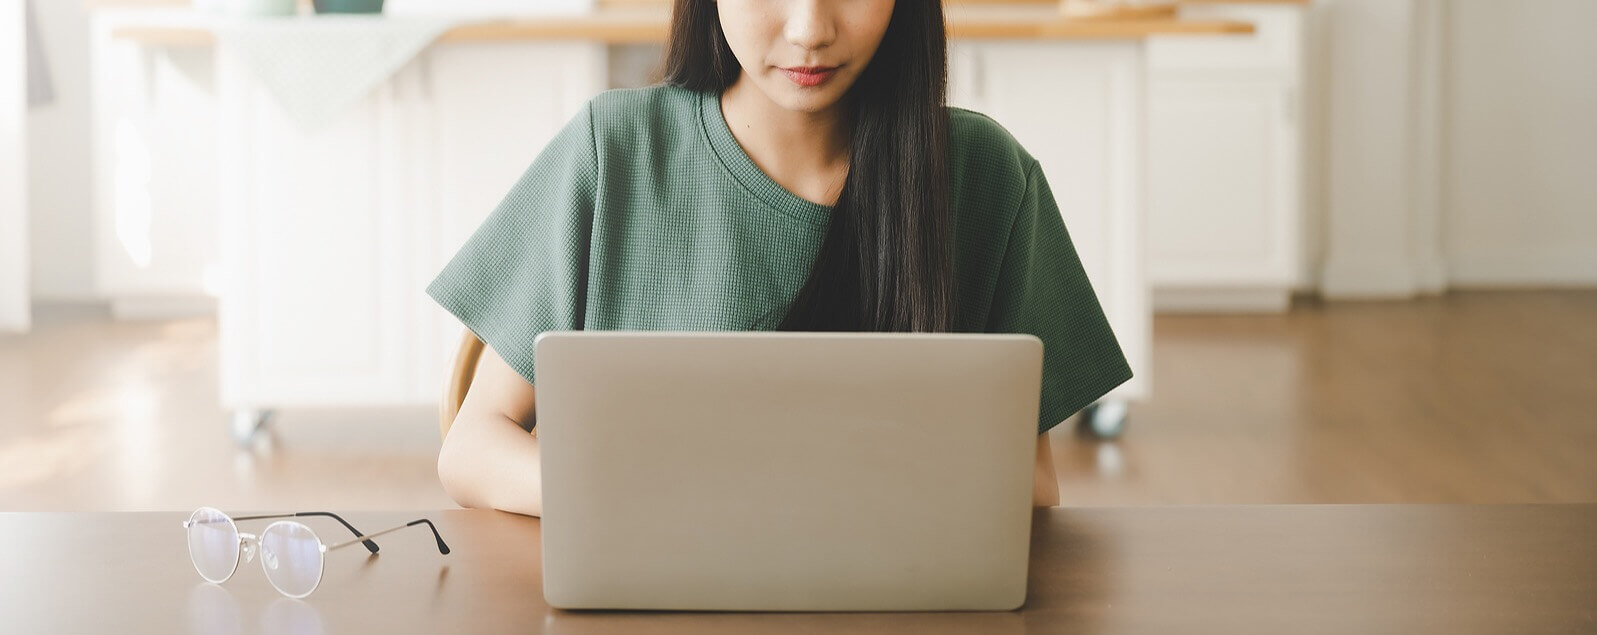 Image of a woman in a green shirt searching on her laptop for an EMDR therapist in Orlando, FL. Whether you are in Winter Park or Orlando EMDR can help as a form of trauma therapy.